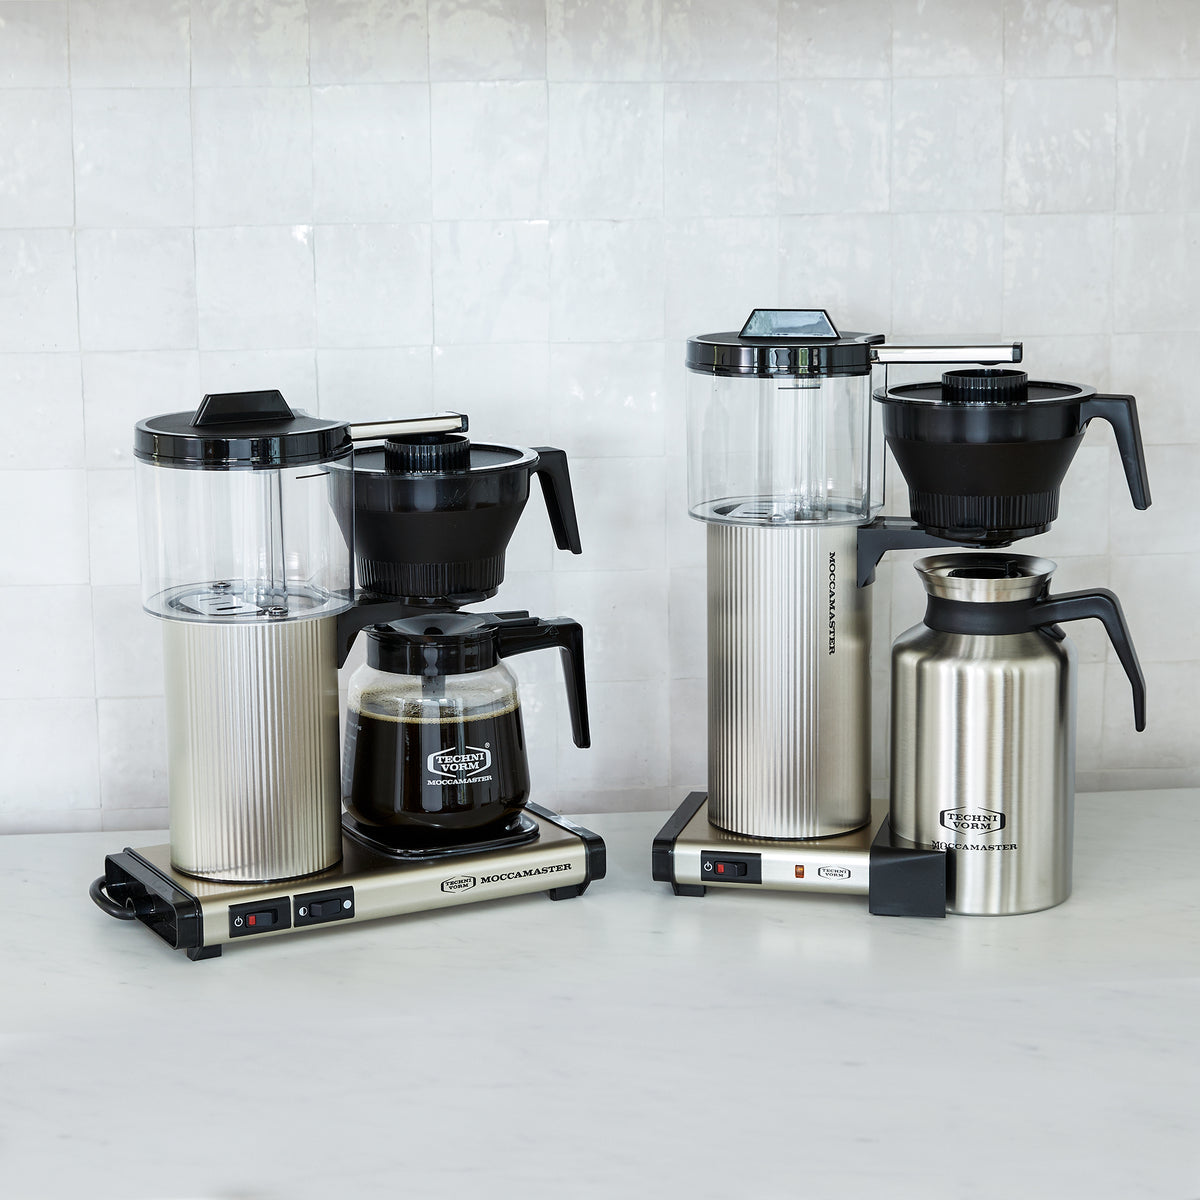 Collection of Moccamaster coffee machines with various designs, including clear water reservoirs, silver bodies, glass carafes, and stainless steel carafes, displayed against a white tiled backdrop.